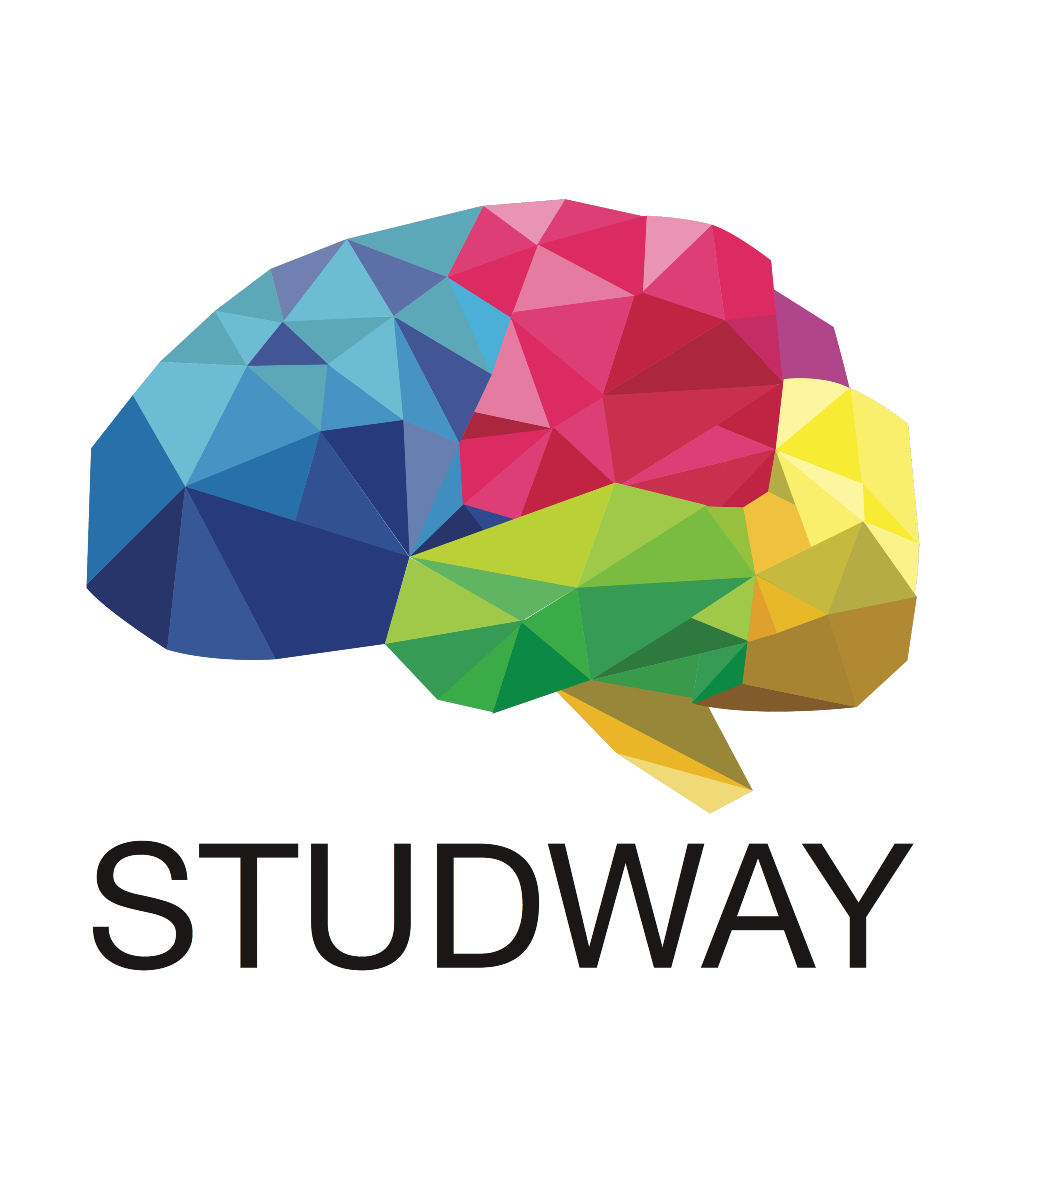 Online edition "STUDWAY"